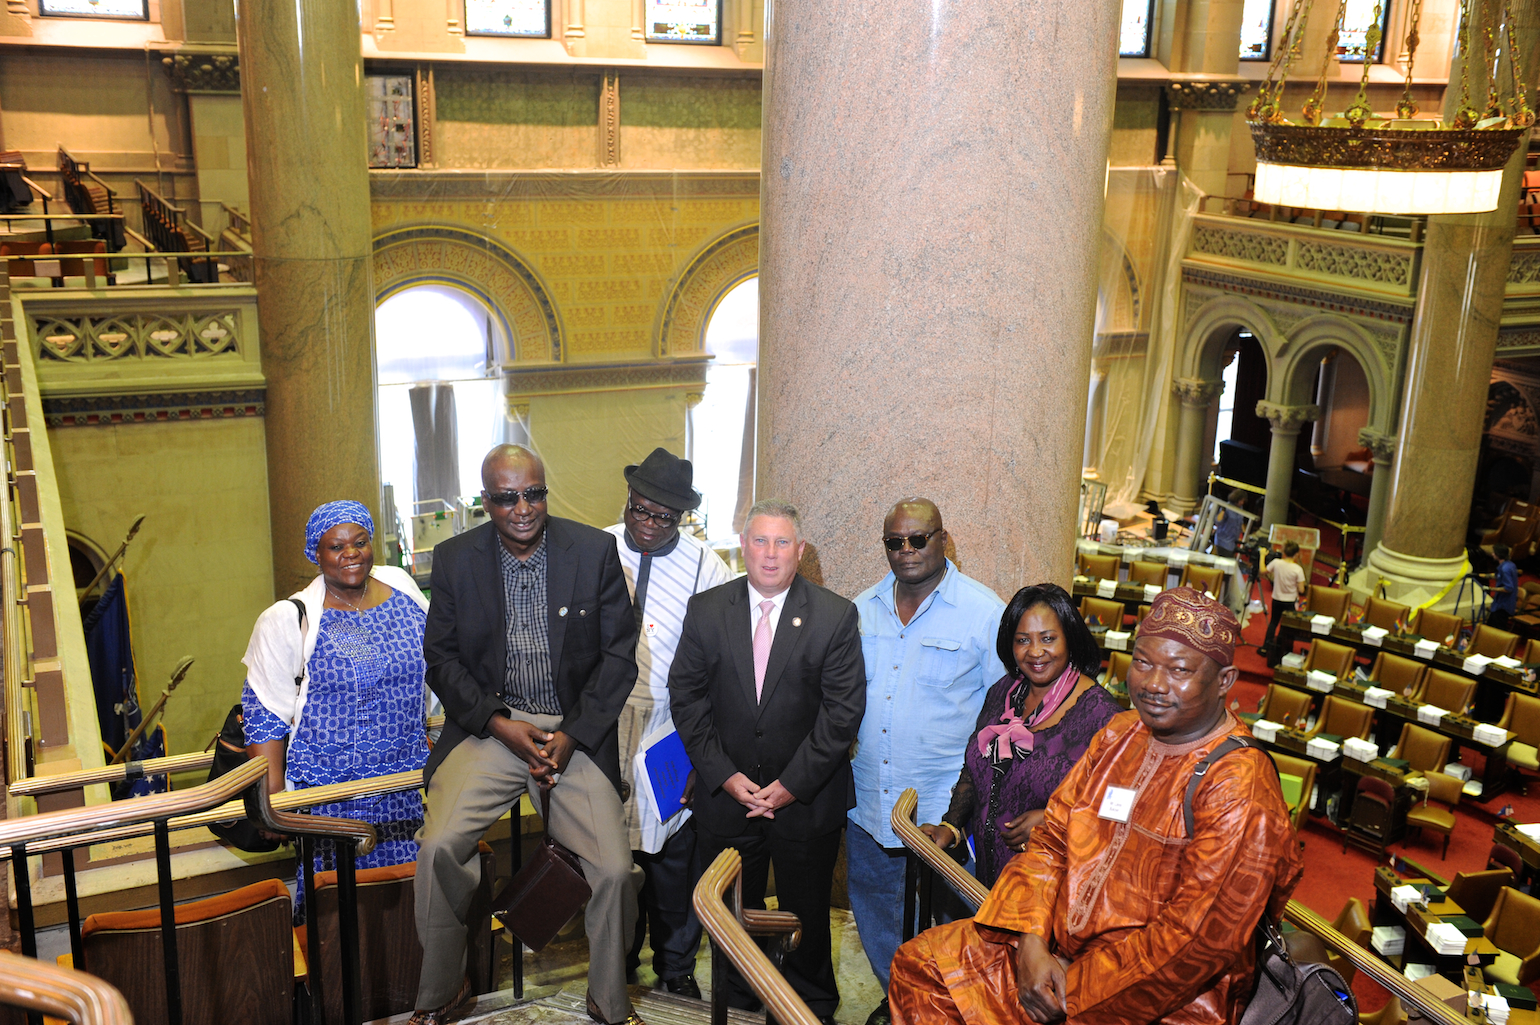 Assemblymember McDonald welcomes Nigerian delegates from the International Center of the Capital Region to the Assembly Chambers.